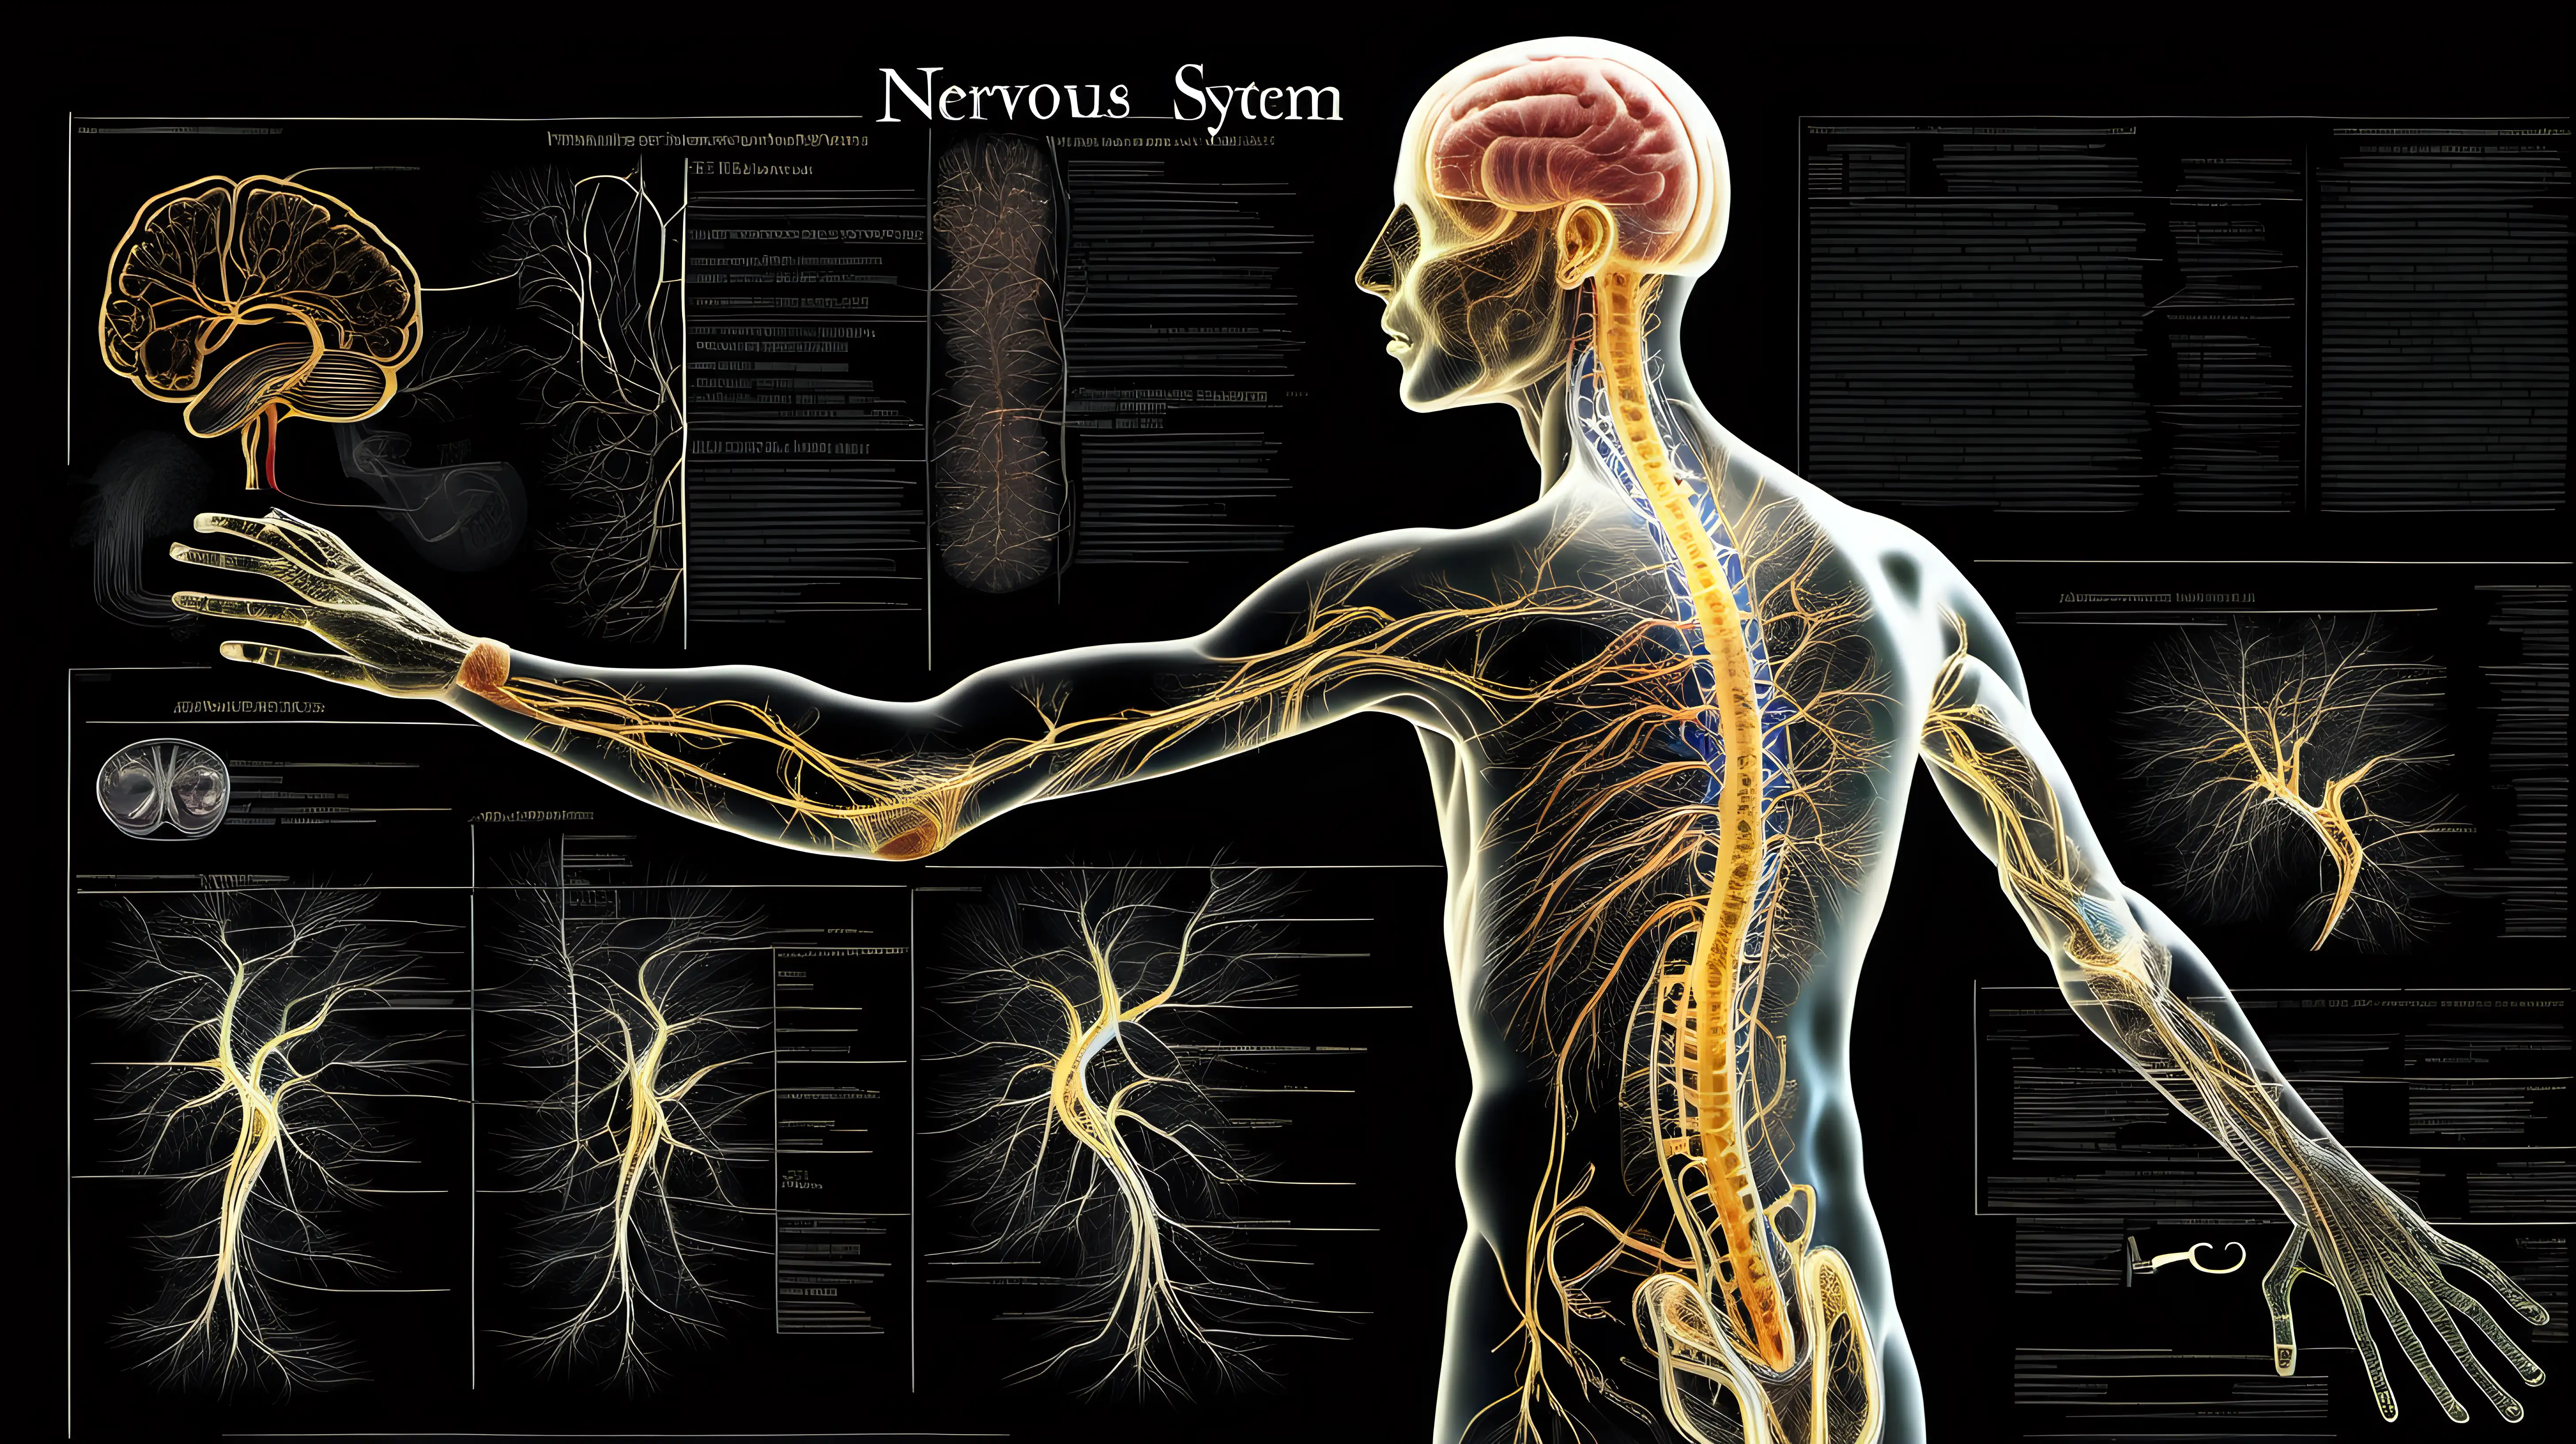 A compelling image showcasing the elegance of the nervous system, with a transparent human body and nerve impulses running from the brain, set against a black background to accentuate the intricate details.